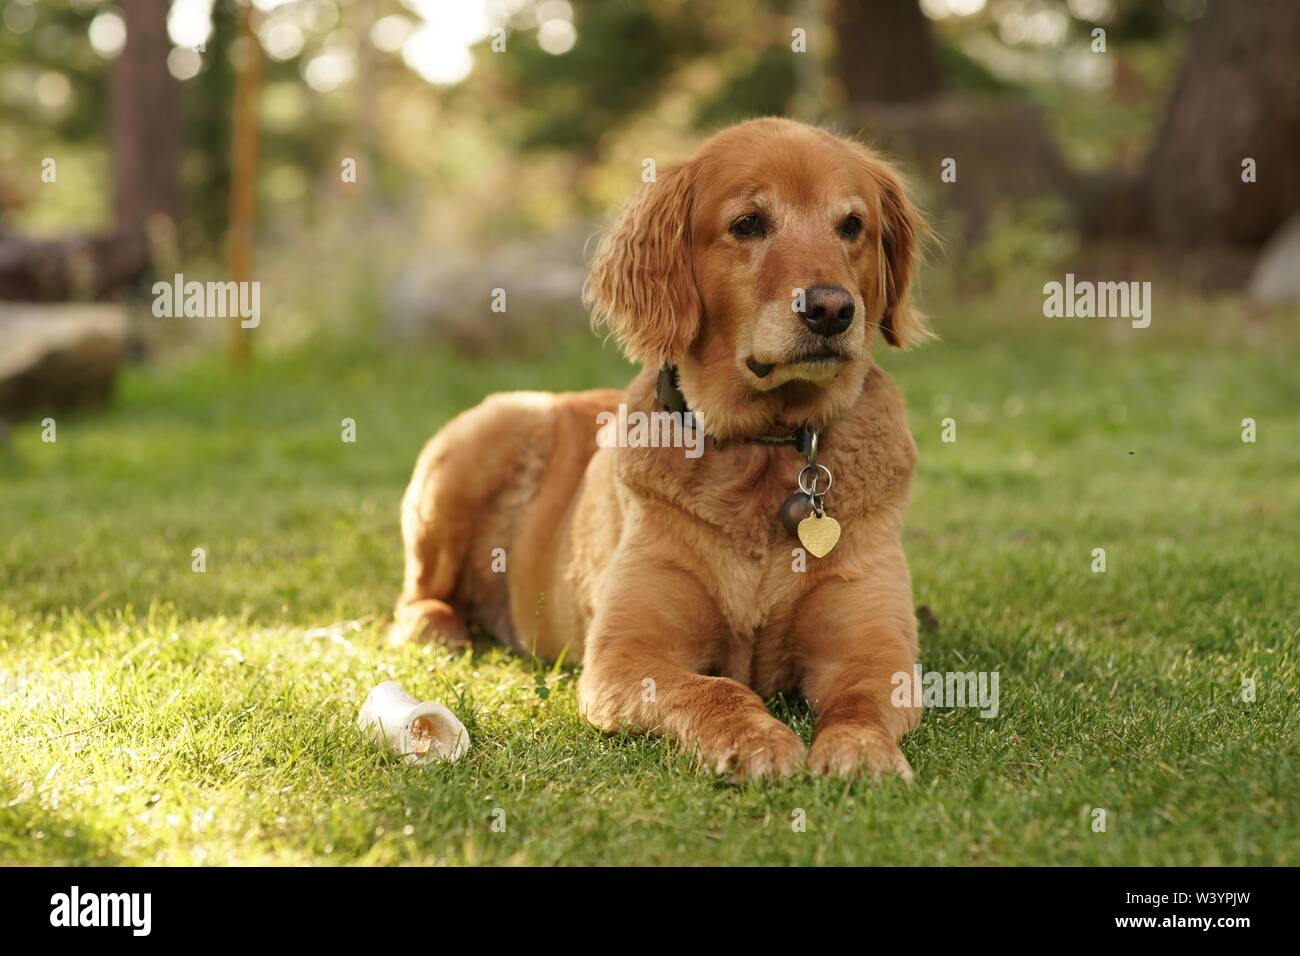 Closeup shot of a cute Golden retriever laying on the grass on the suuny day with blurred background Stock Photo